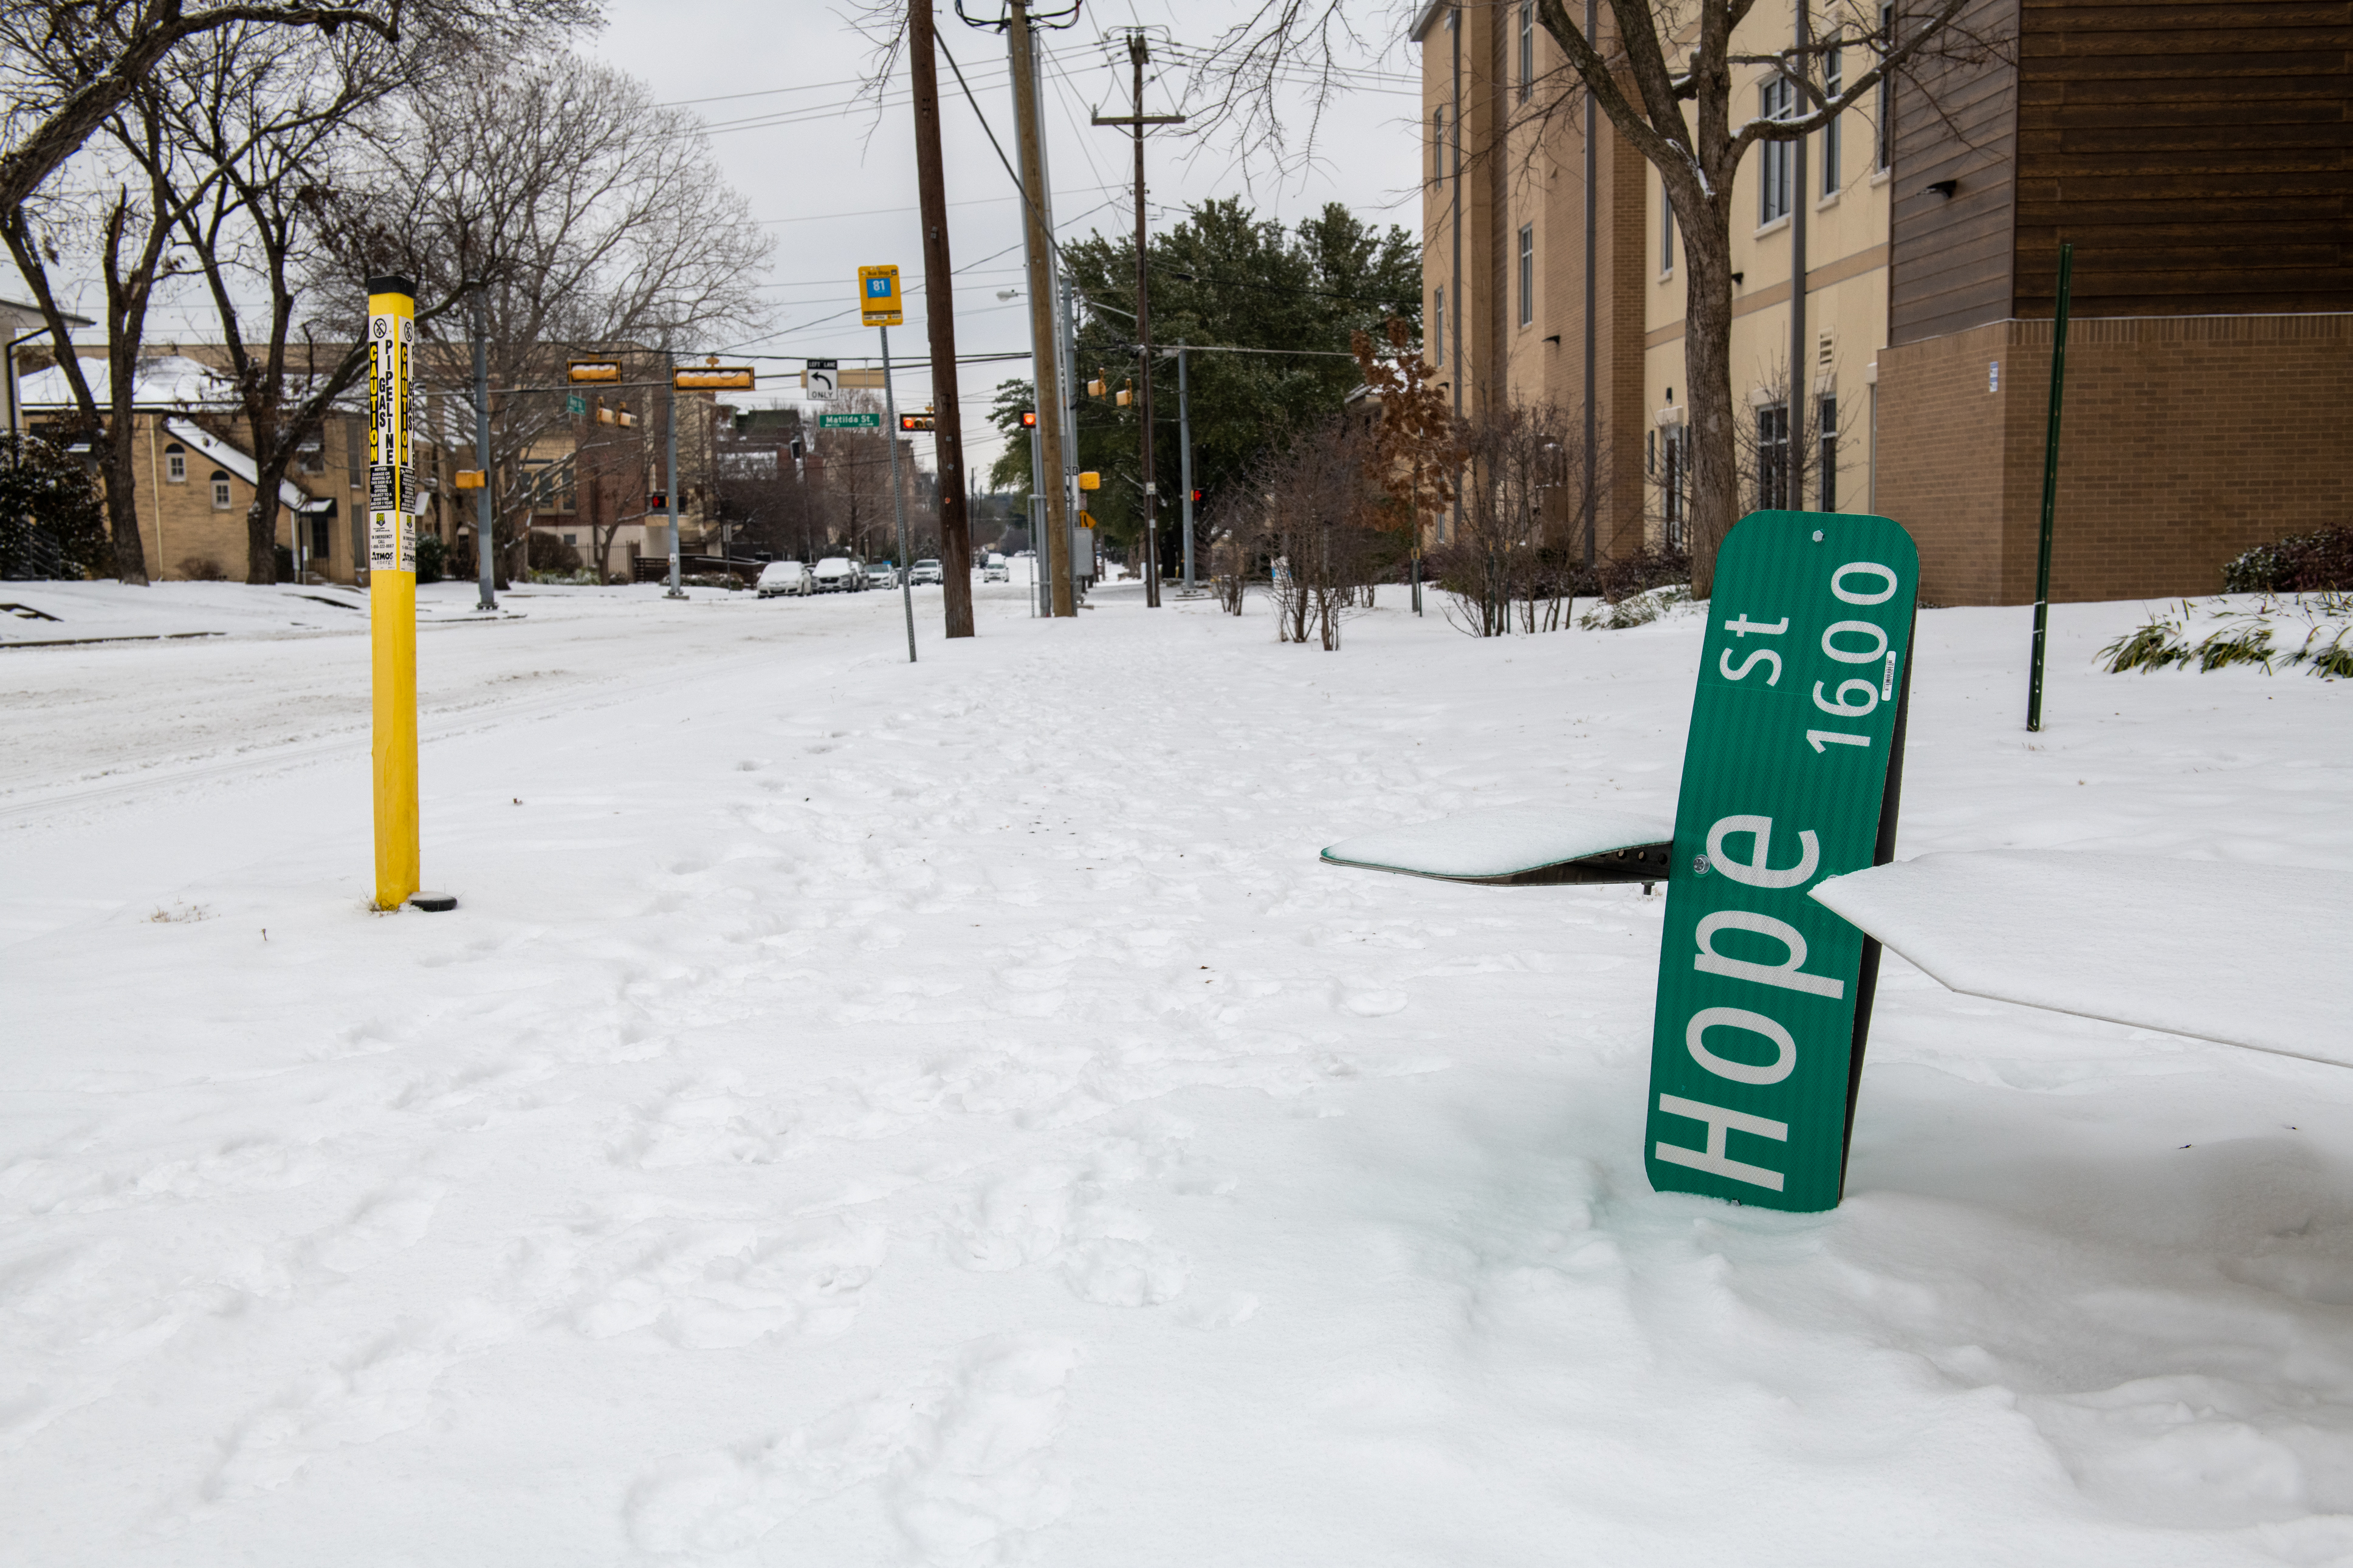 An overturned street sign that reads “Hope Street” laying on a snow-covered street 